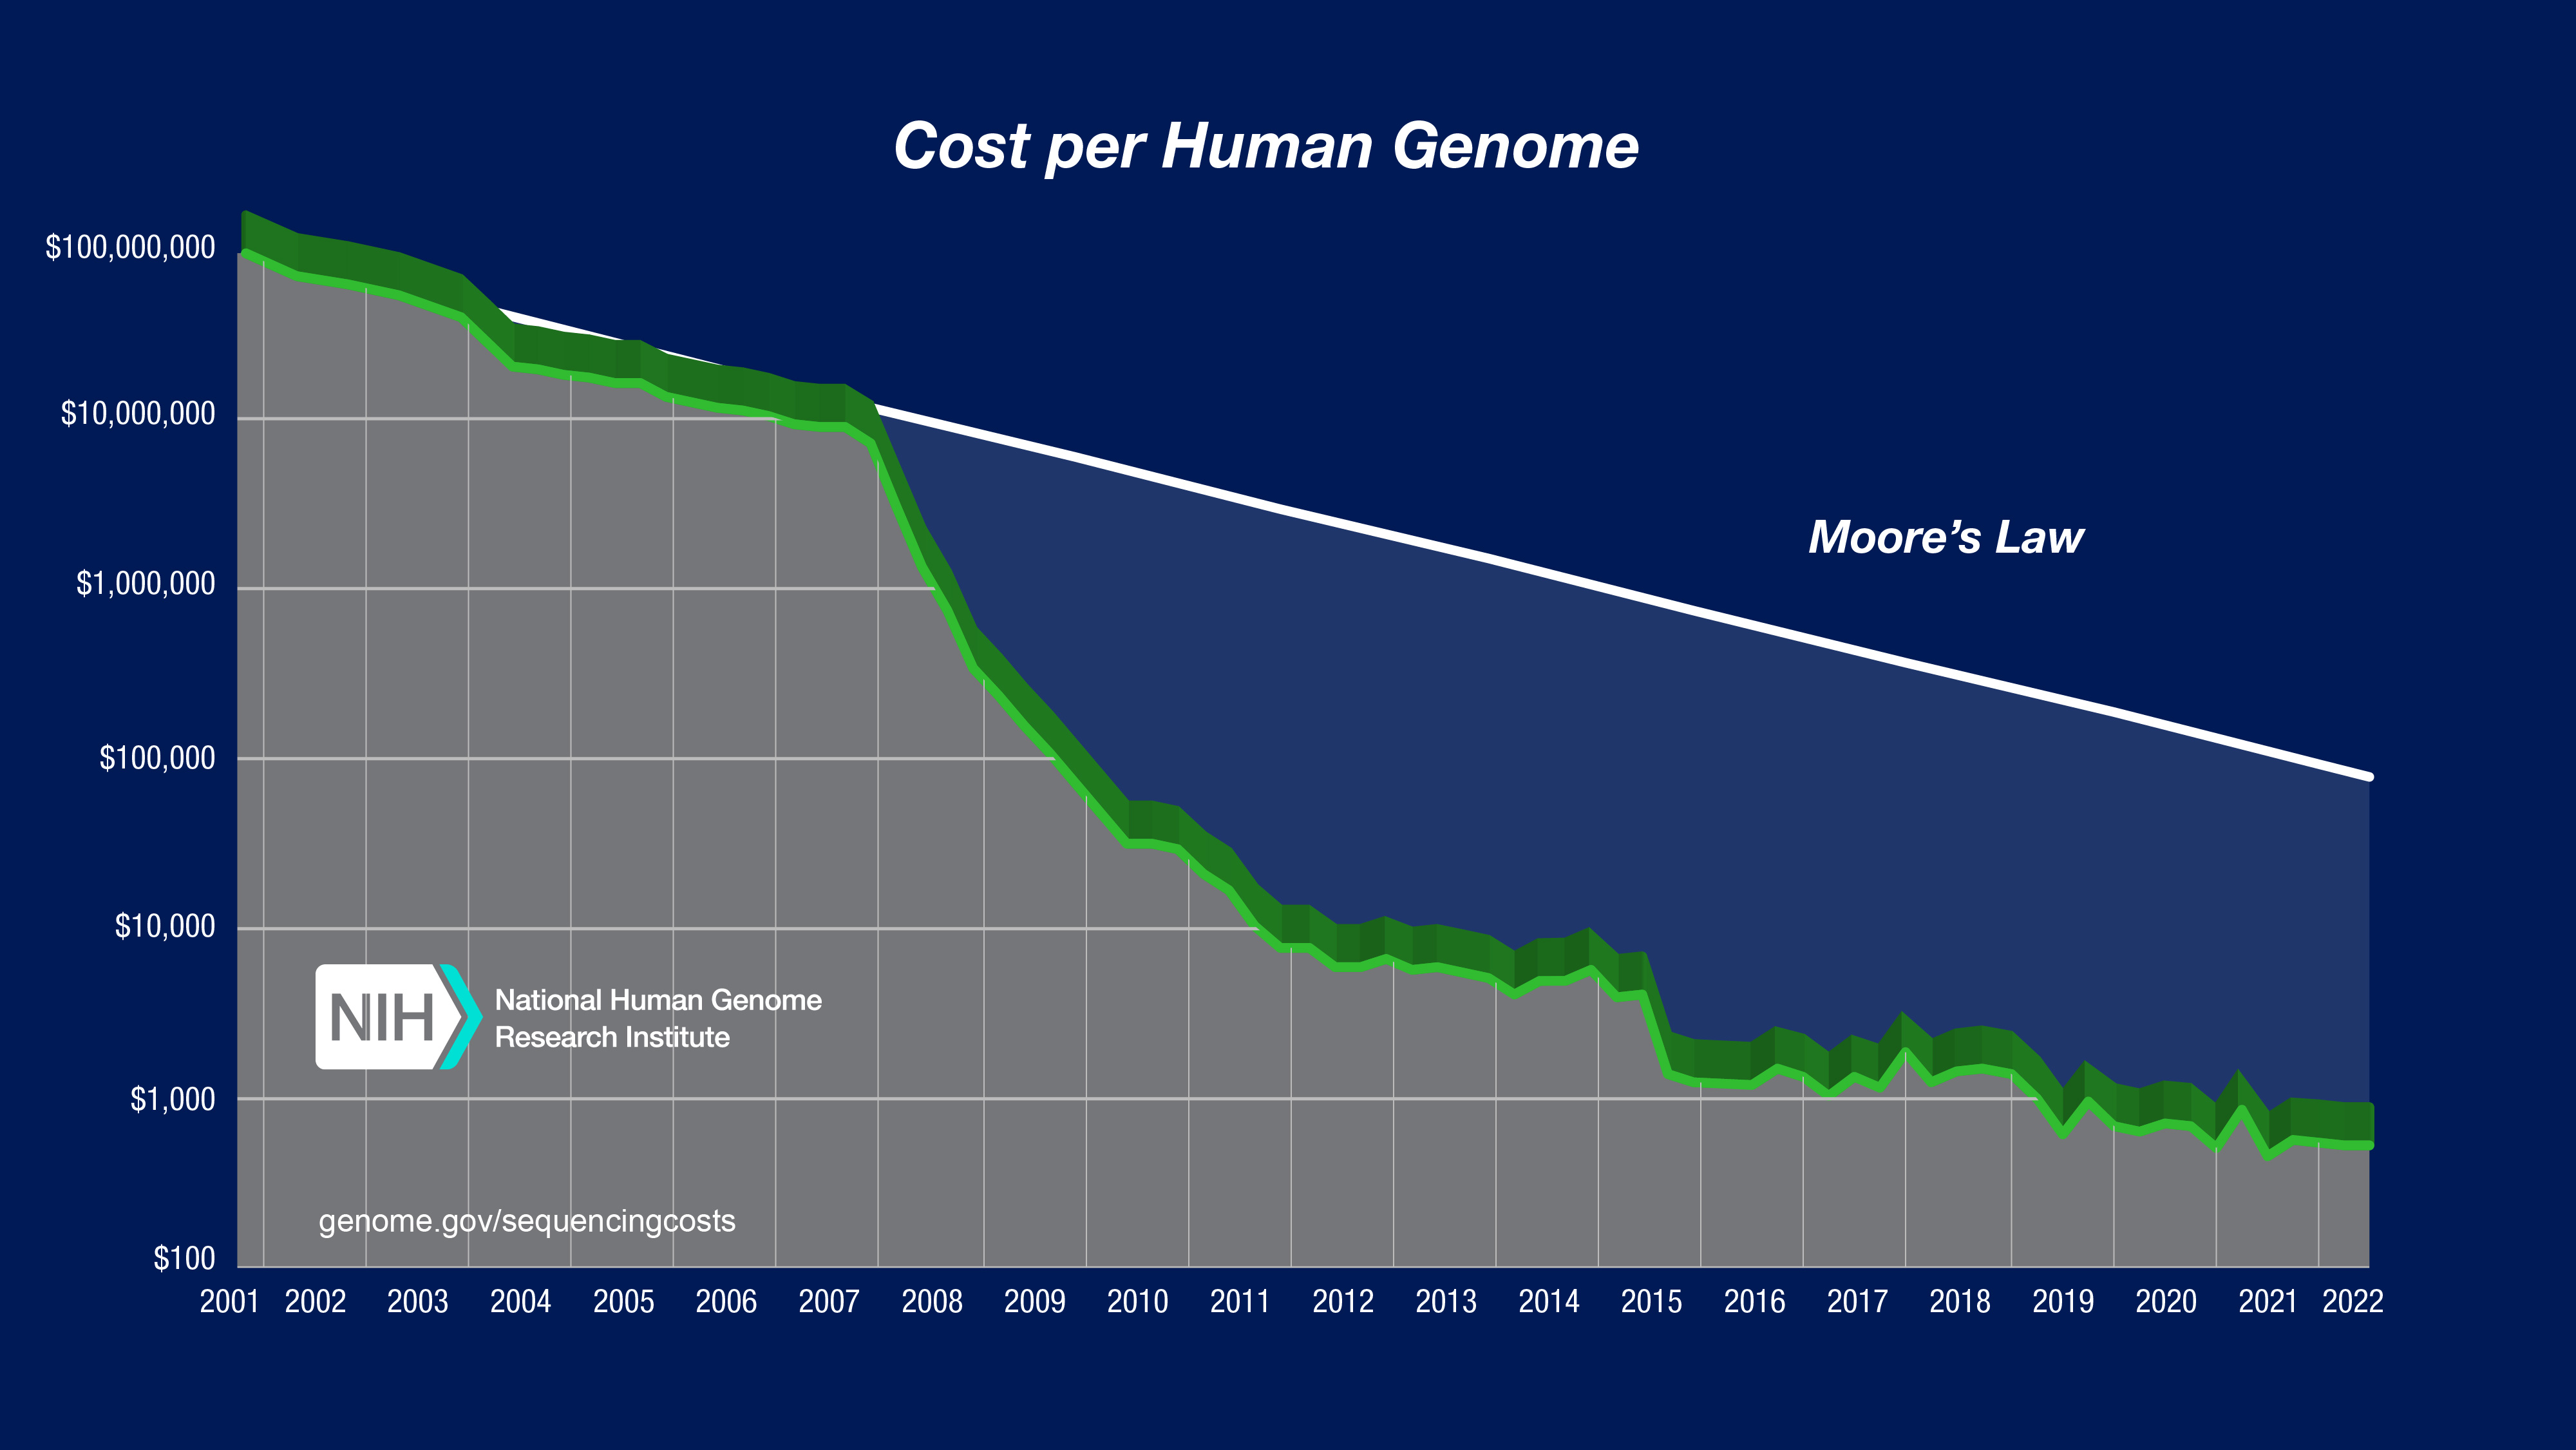 2022_Sequencing_cost_per_Human_Genome.jpg